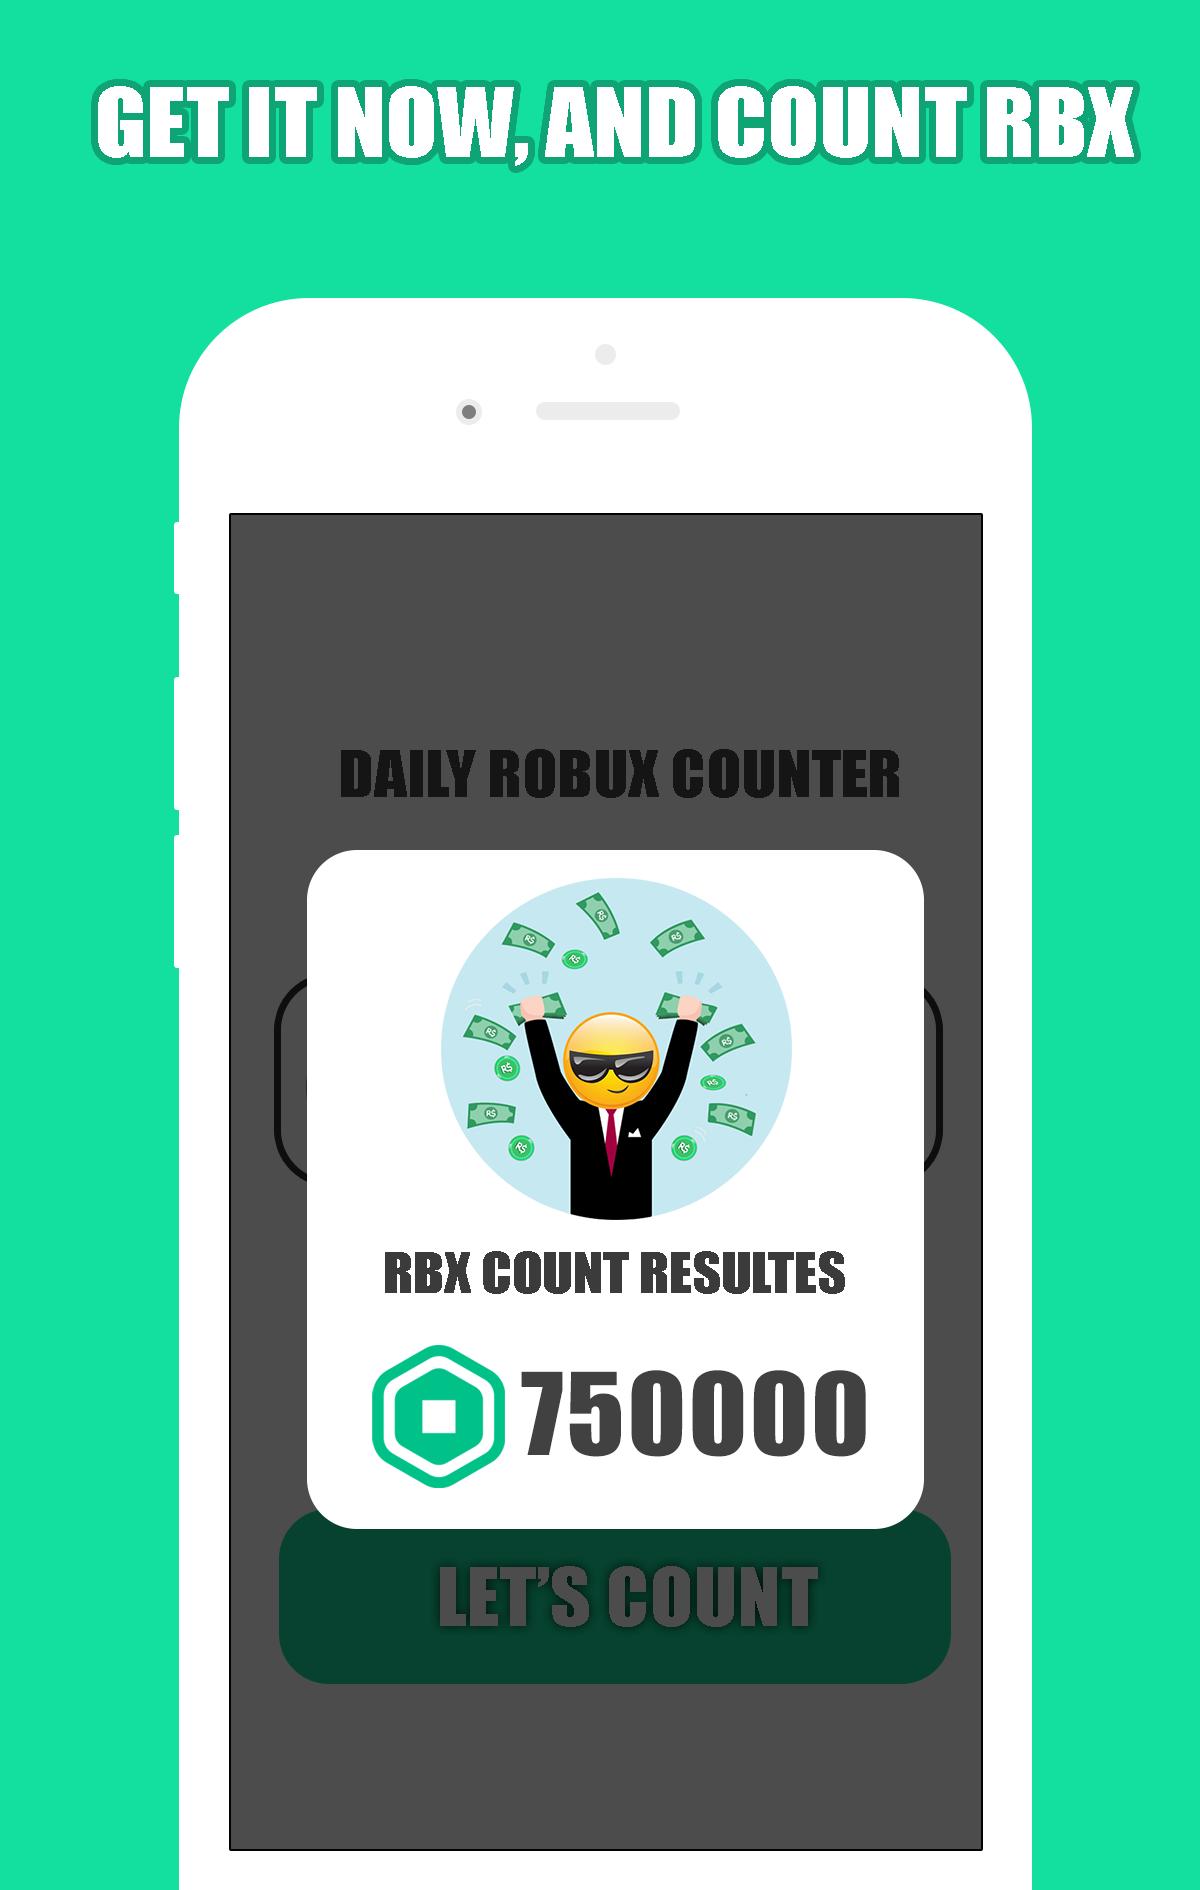 Free Robux Counter Rbx Masters For Android Apk Download - hack para tener 750000 de robux gratis 5